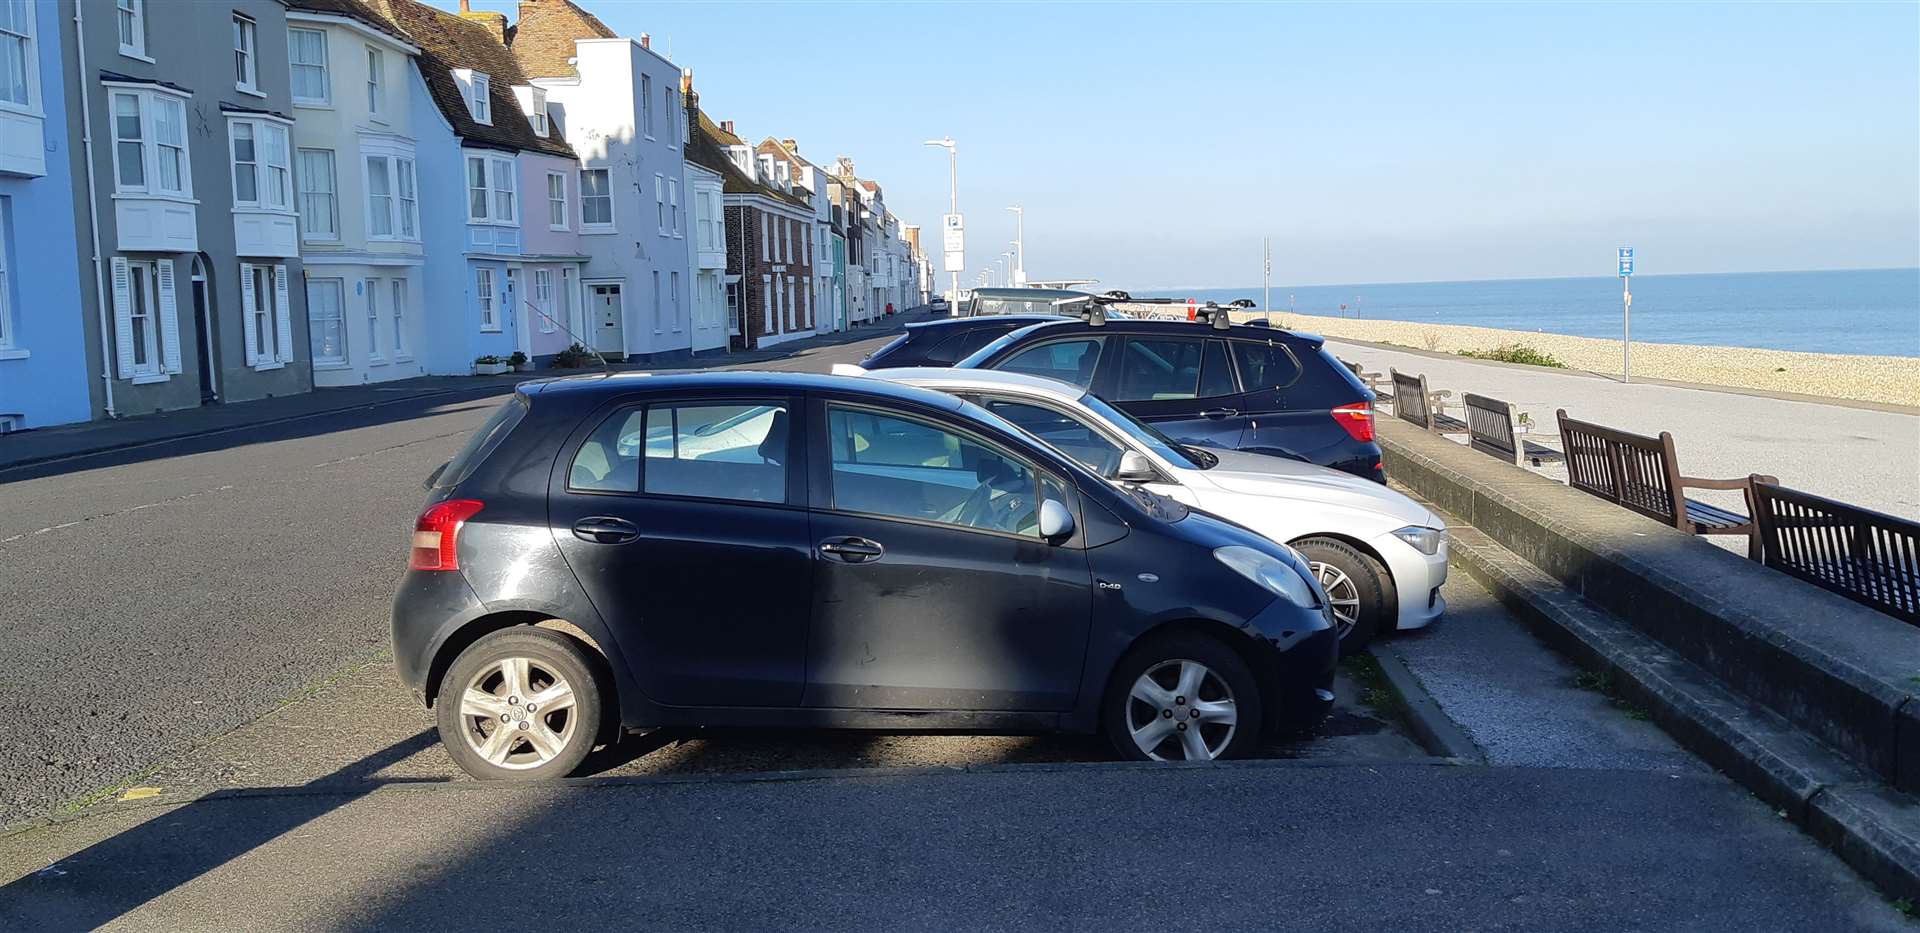 Deal permit holders can park in existing pay and display spaces